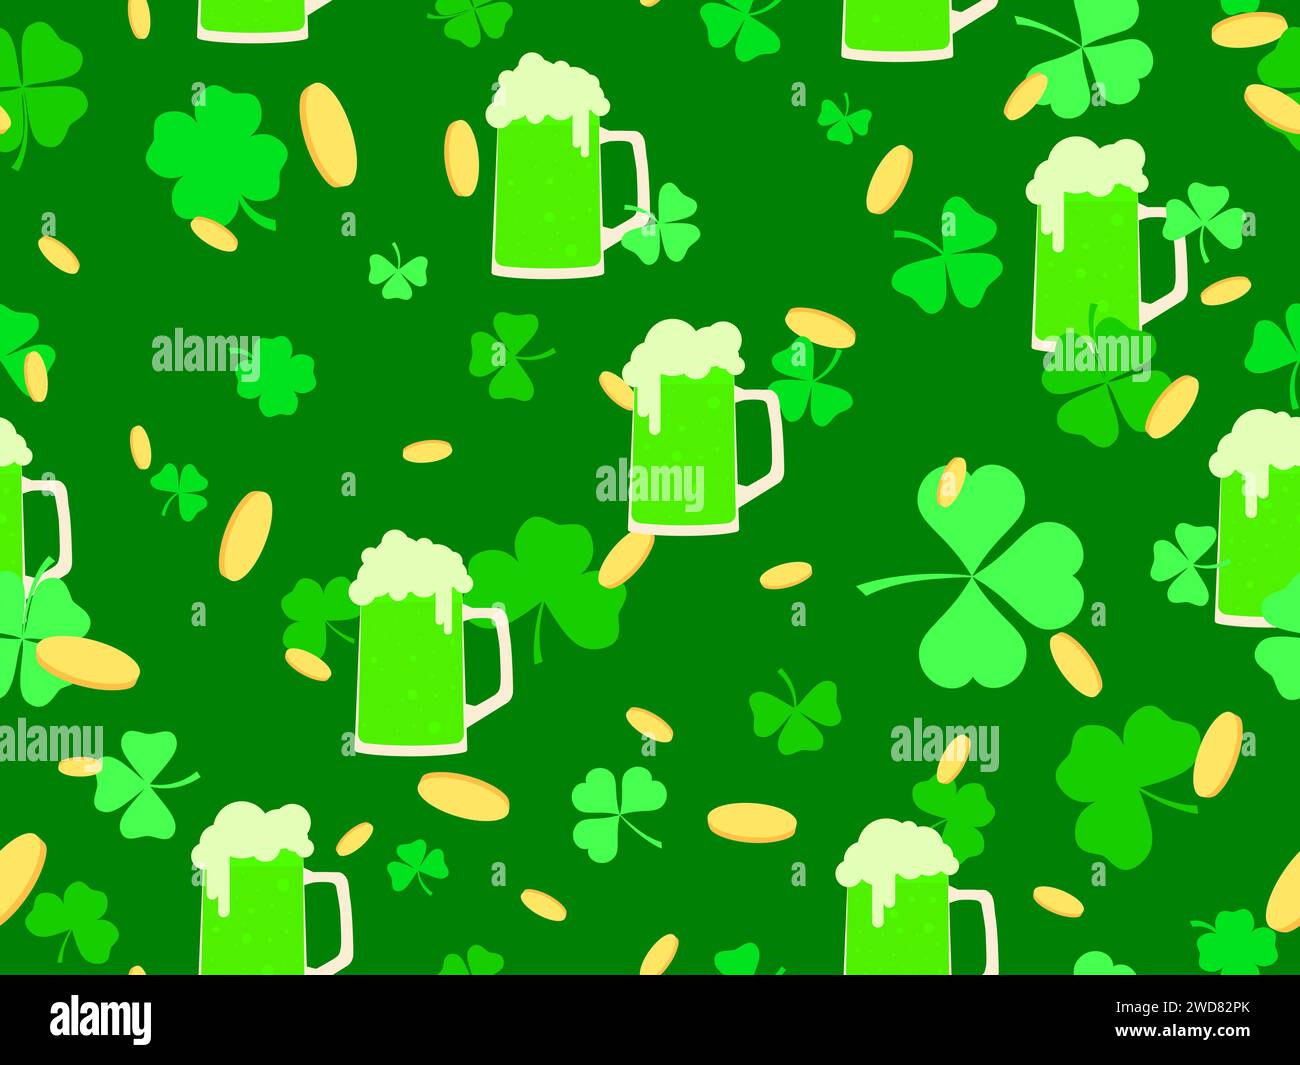 Seamless pattern with glasses of green beer, clover leaves and gold coins for St. Patrick's Day. Beer mugs with foam. Festive design for wallpaper, ba Stock Vector